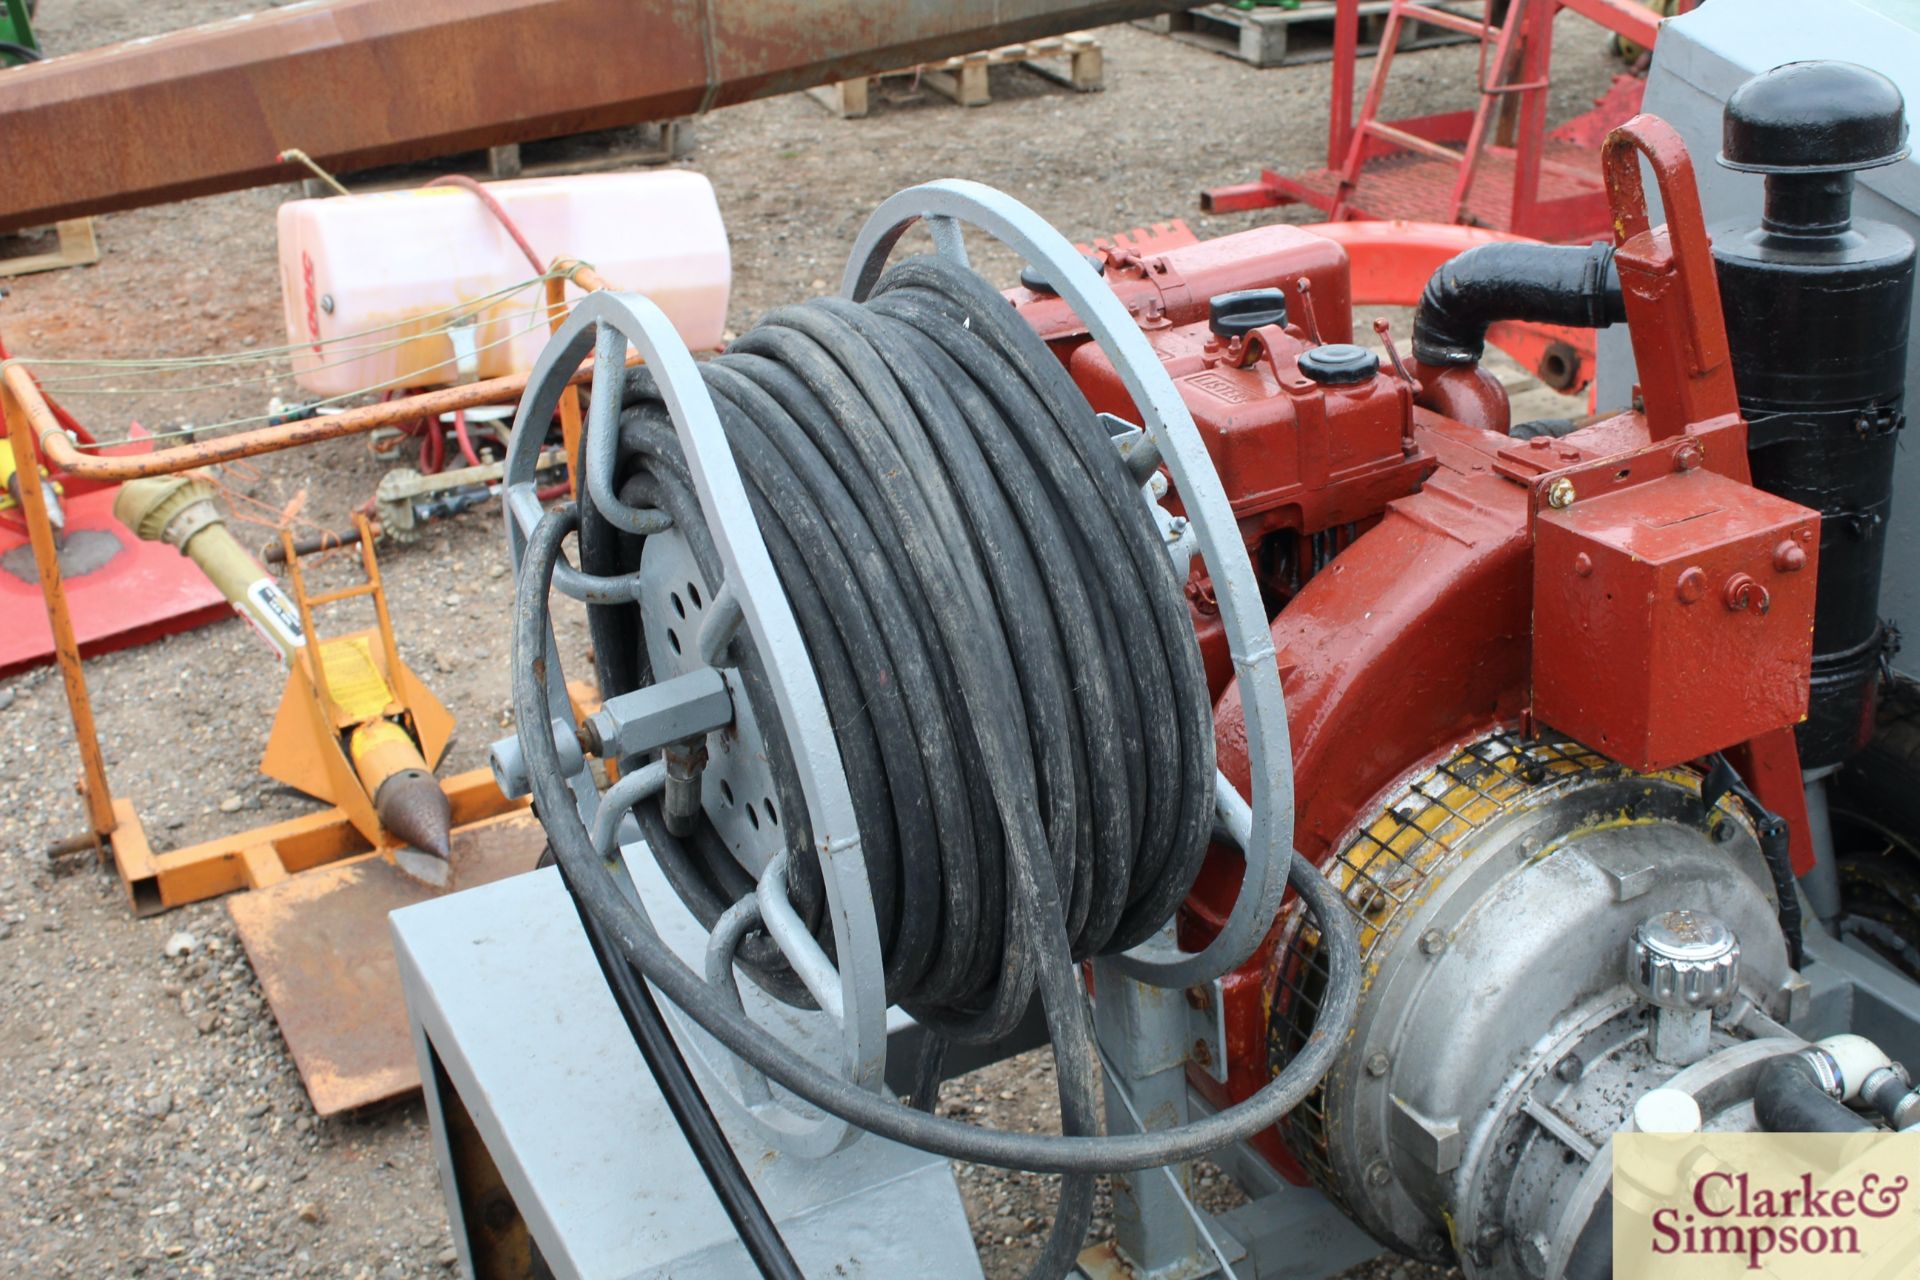 Harben fast tow high pressure drain jetter. With Lister diesel engine. - Image 6 of 8